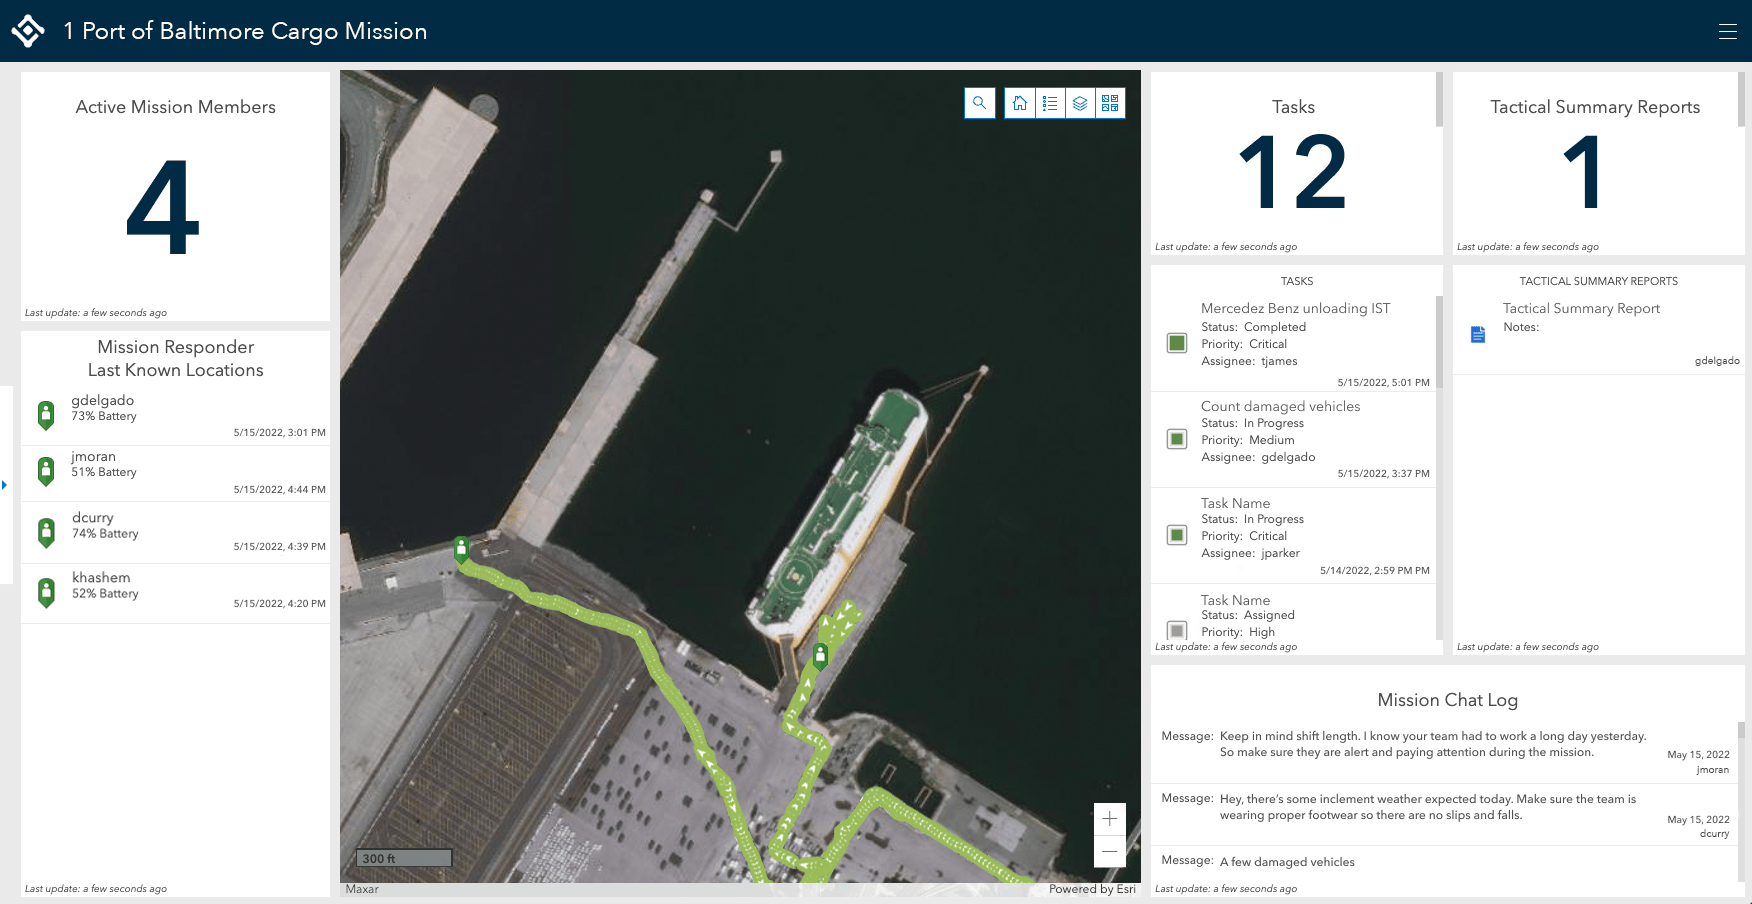 Map of a cargo port surrounded by a digital dashboard of data.